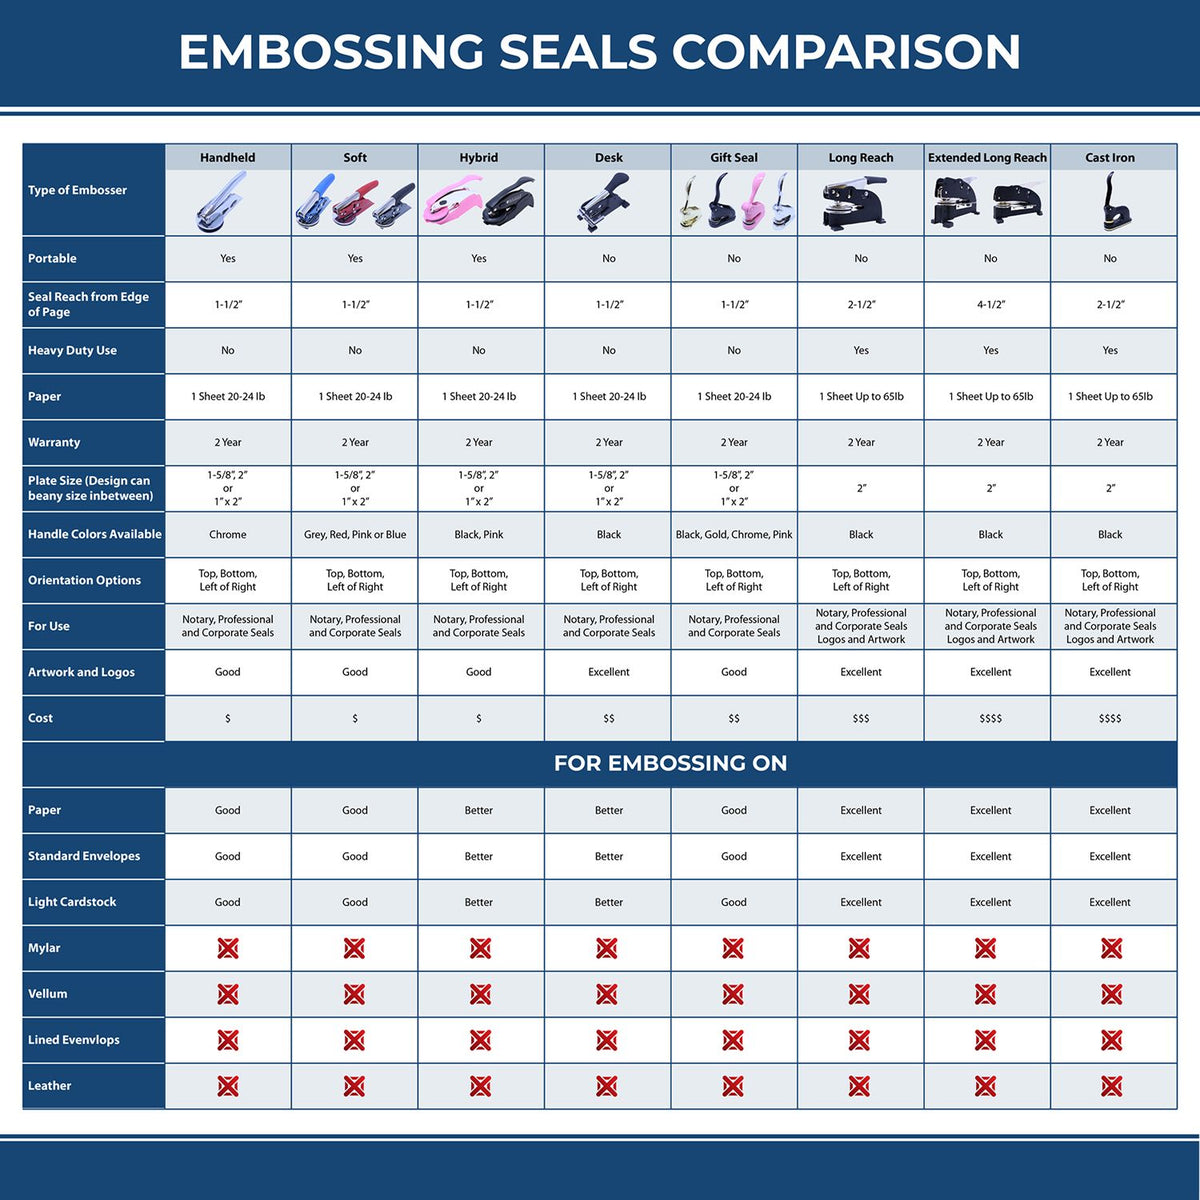 A comparison chart for the different types of mount models available for the Soft Illinois Professional Geologist Seal